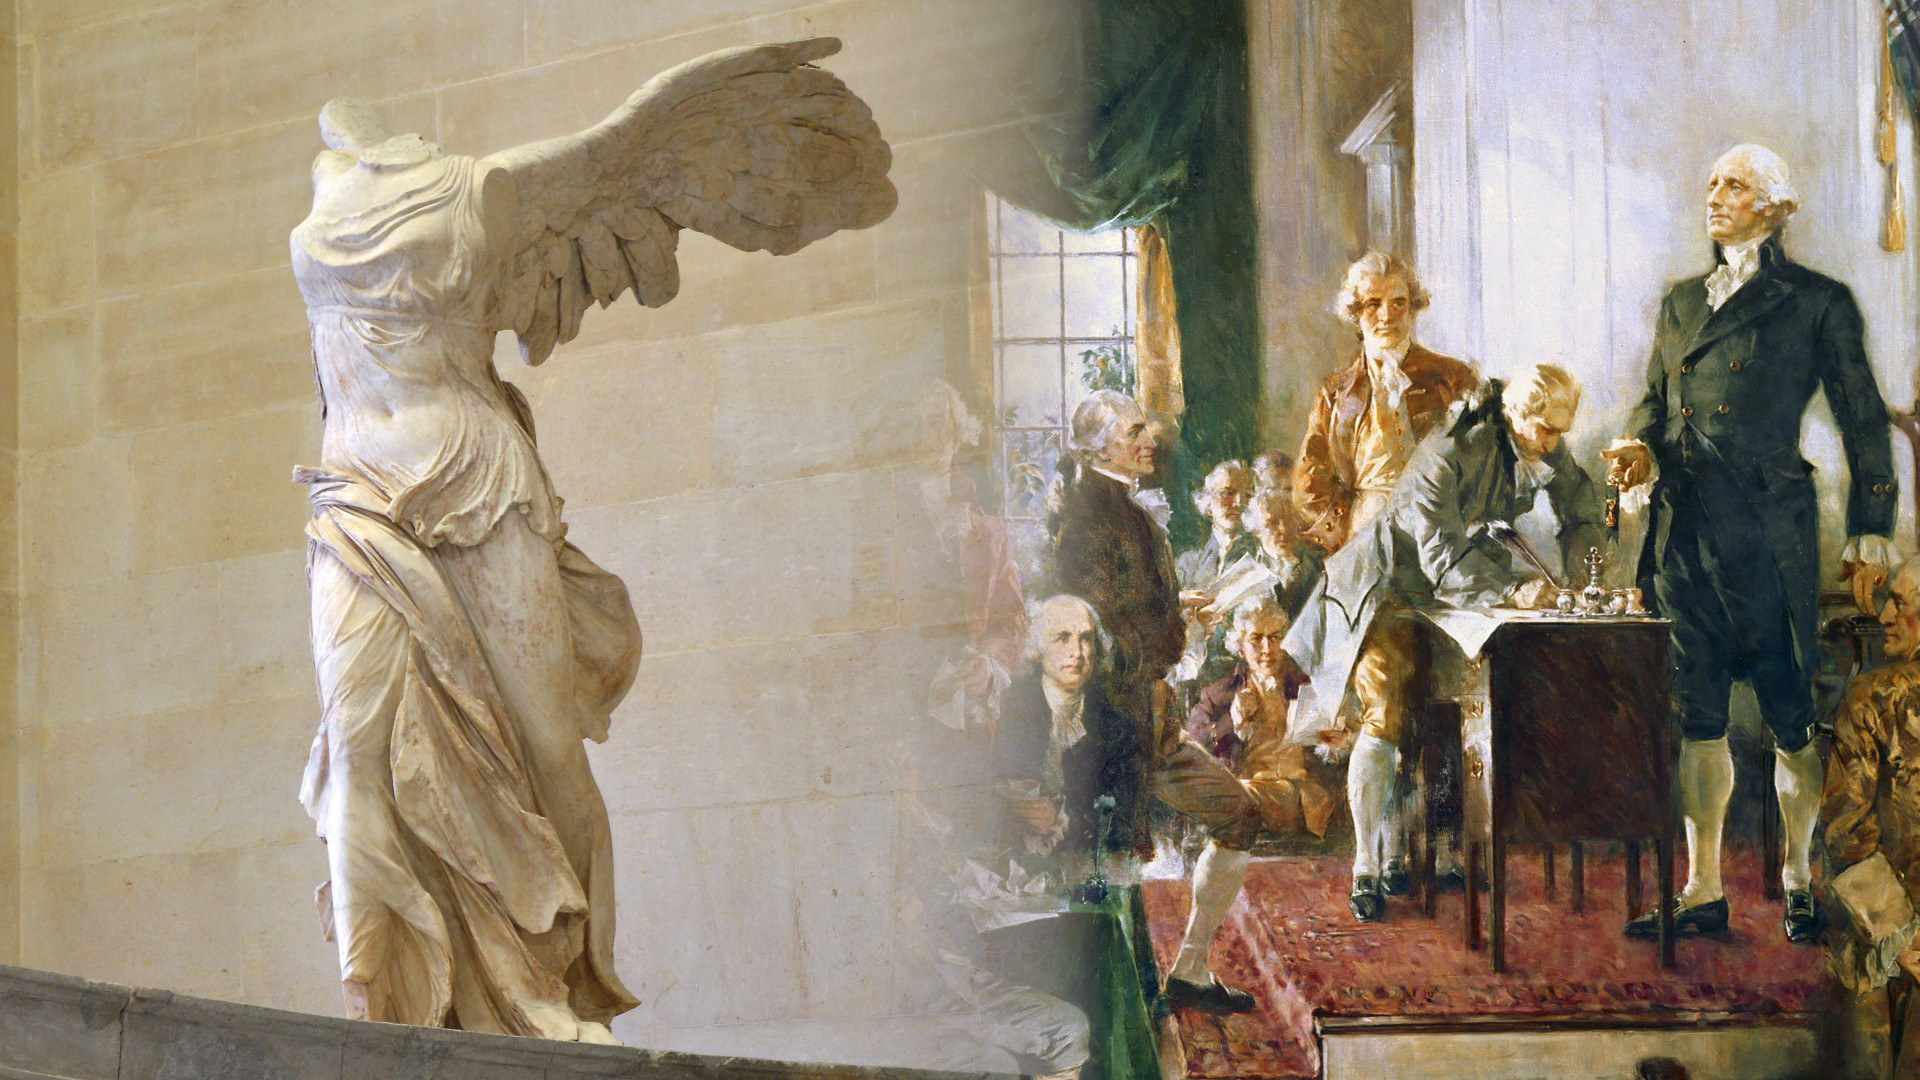 Composite image of a photo of Nike of Samothrace, the partial statue housed in the Louvre museum, and “Scene at the Signing of the Constitution of the United States” by Howard Chandler Christy. Both images Public Domain.